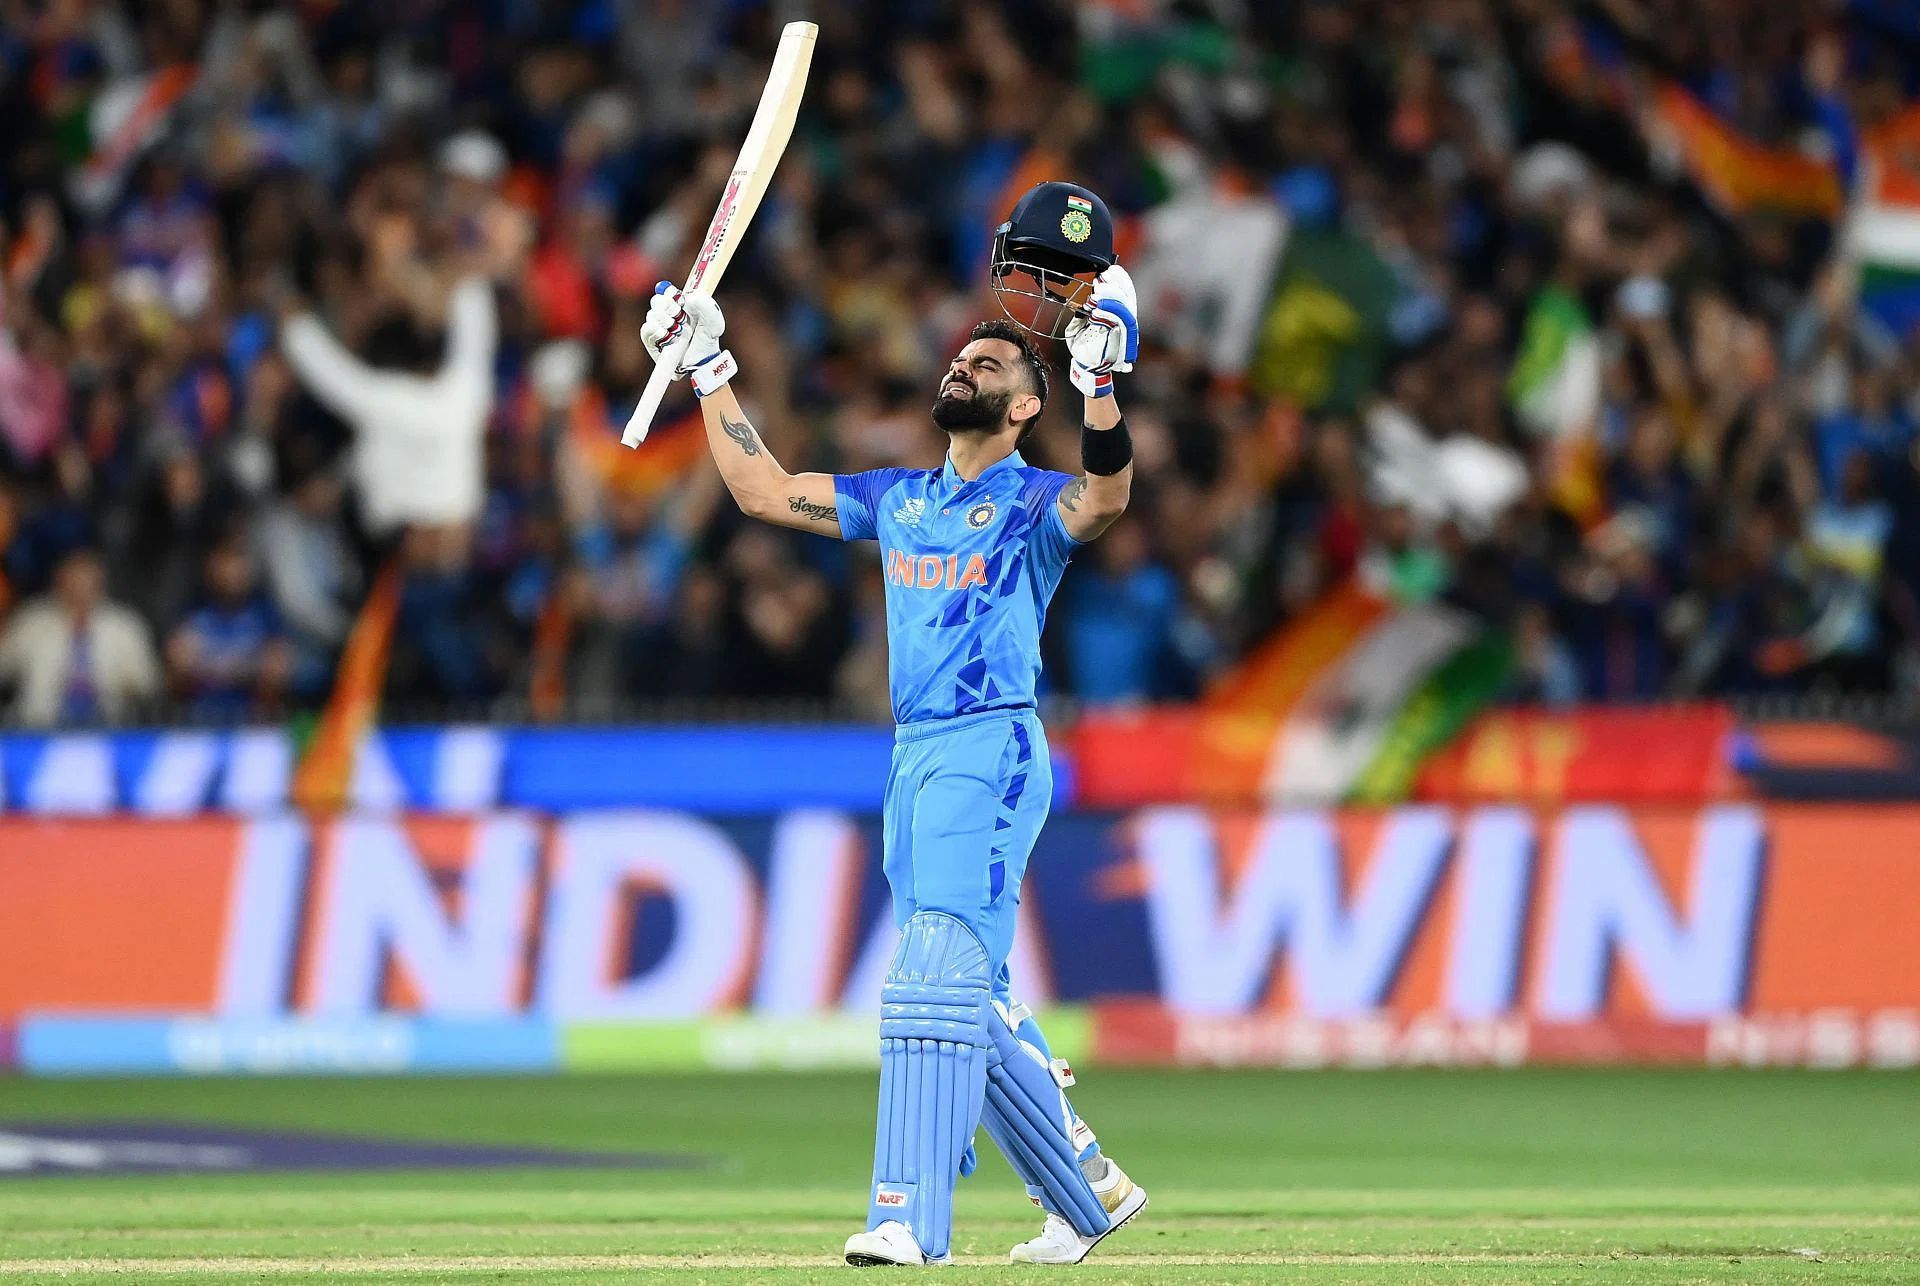 Chasing 160 against Pakistan, Team India were in big trouble at 31/4. Despite a century stand between Virat Kohli and Hardik Pandya, they still needed 48 runs off the last three overs. Kohli then turned it on and played some unbelievable strokes to lift India to an unforgettable triumph. Pic: Getty Images